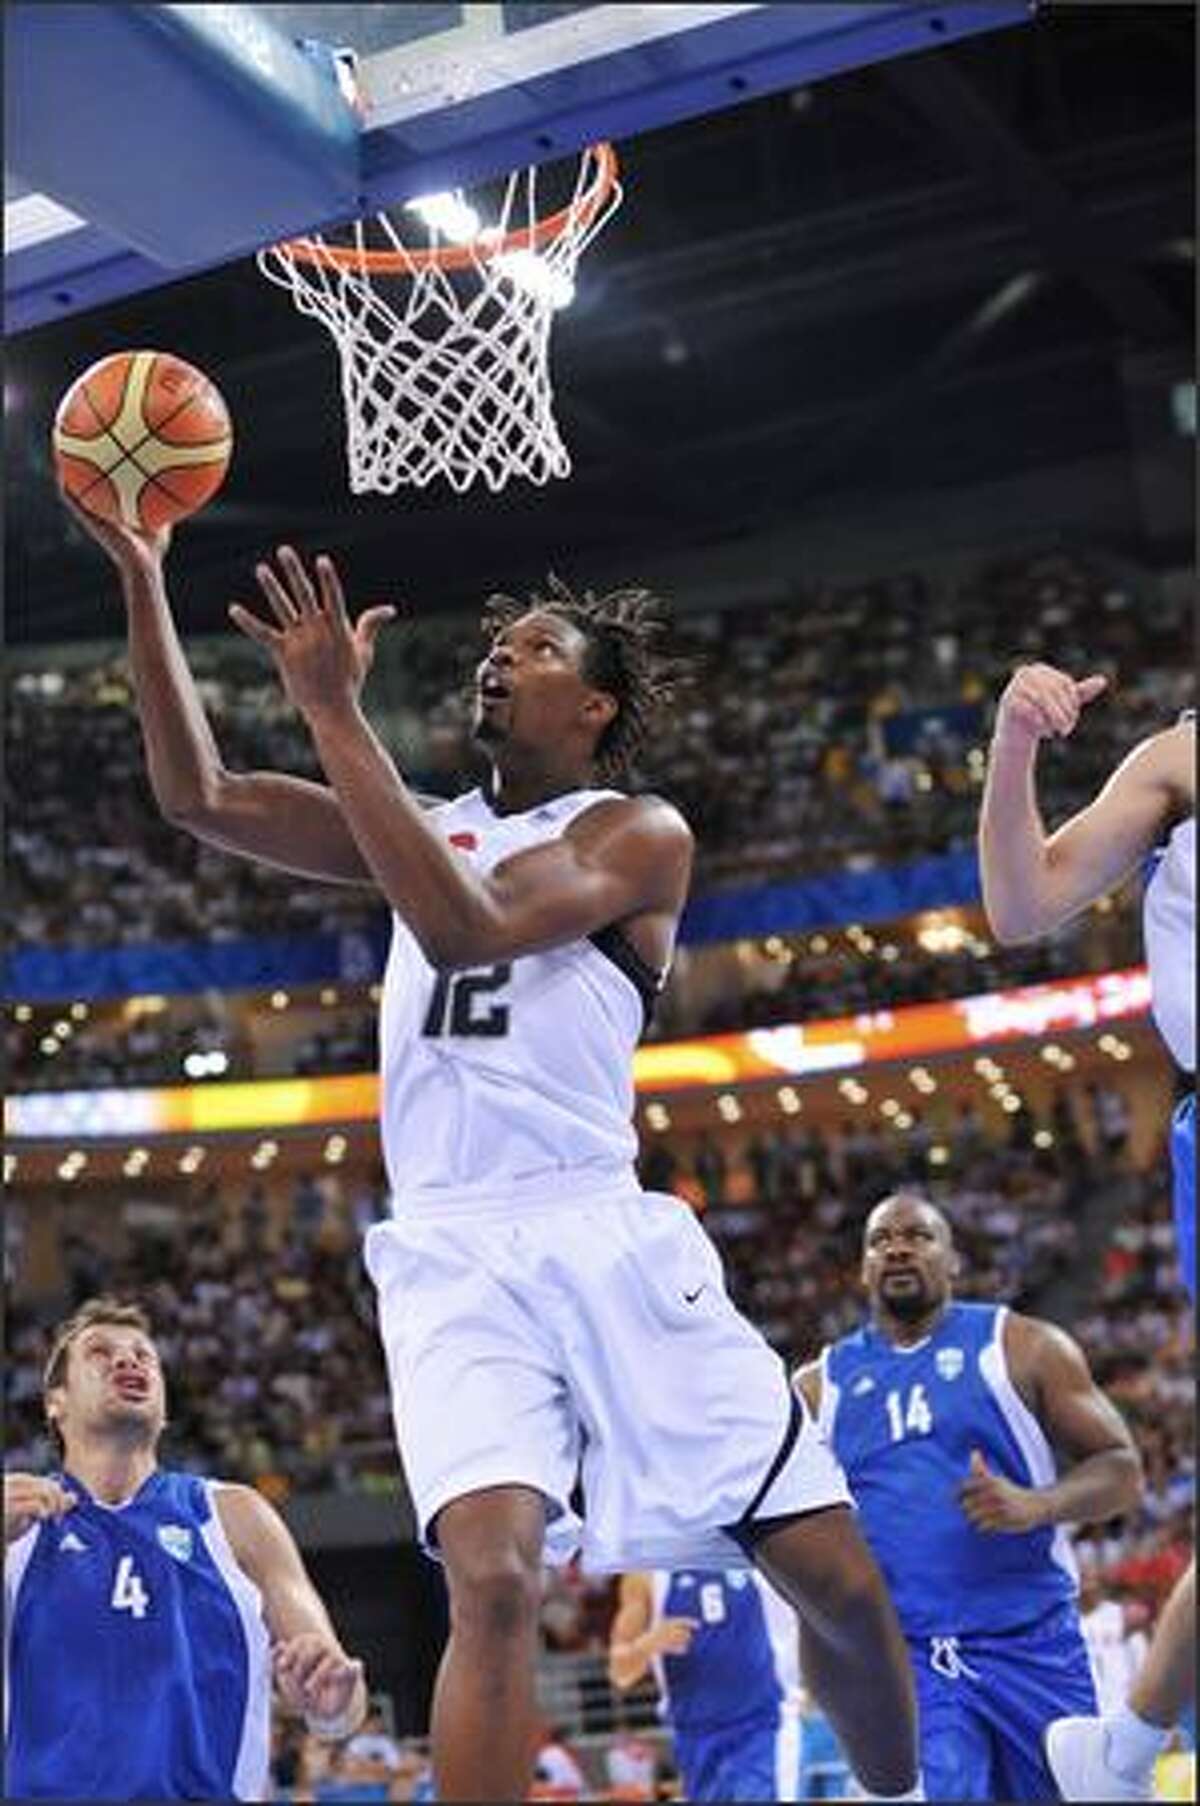 Chris Bosh #12 of the U.S. Men's Senior National Team shoots against Greece during a men's preliminary basketball game at the 2008 Beijing Olympic Games at the Beijing Olympic Basketball gymnasium on Thursday in Beijing, China.